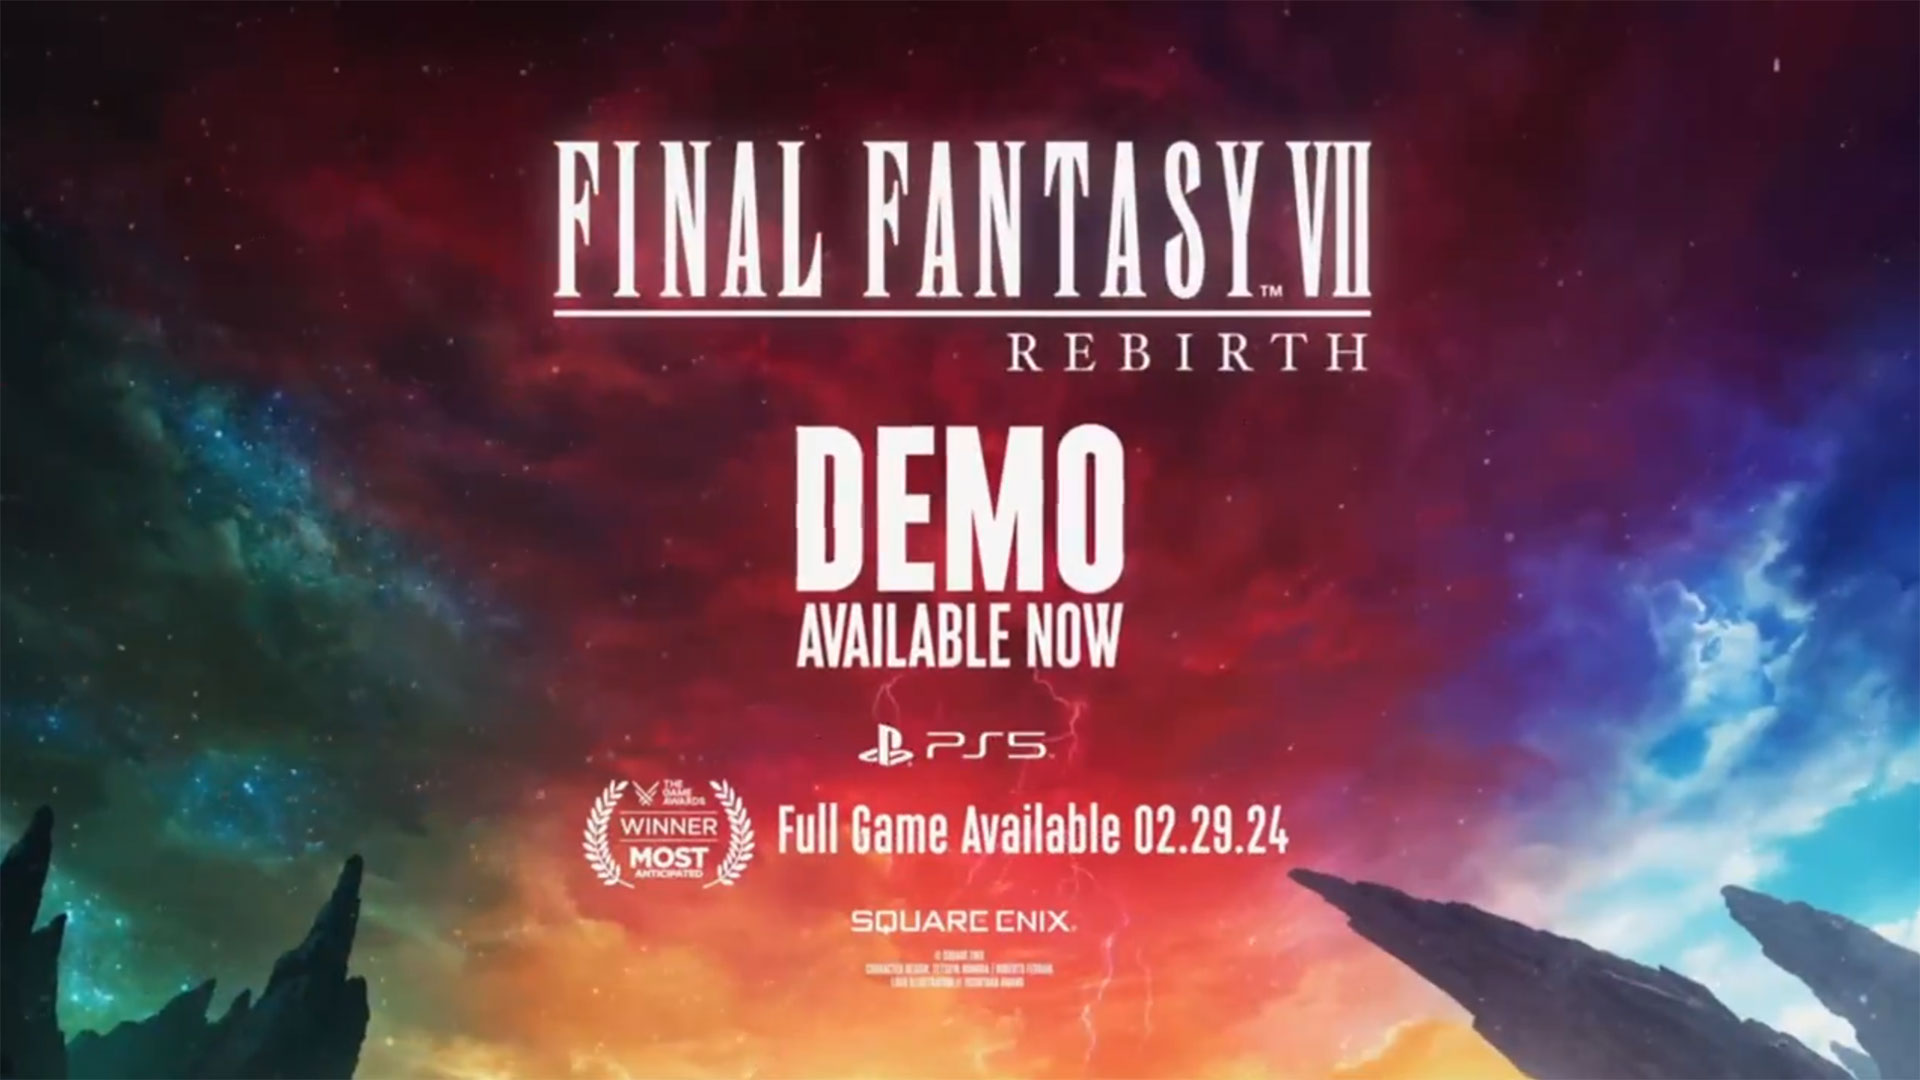 The Final Fantasy VII Rebirth Demo is likely going live tomorrow after the State of Play